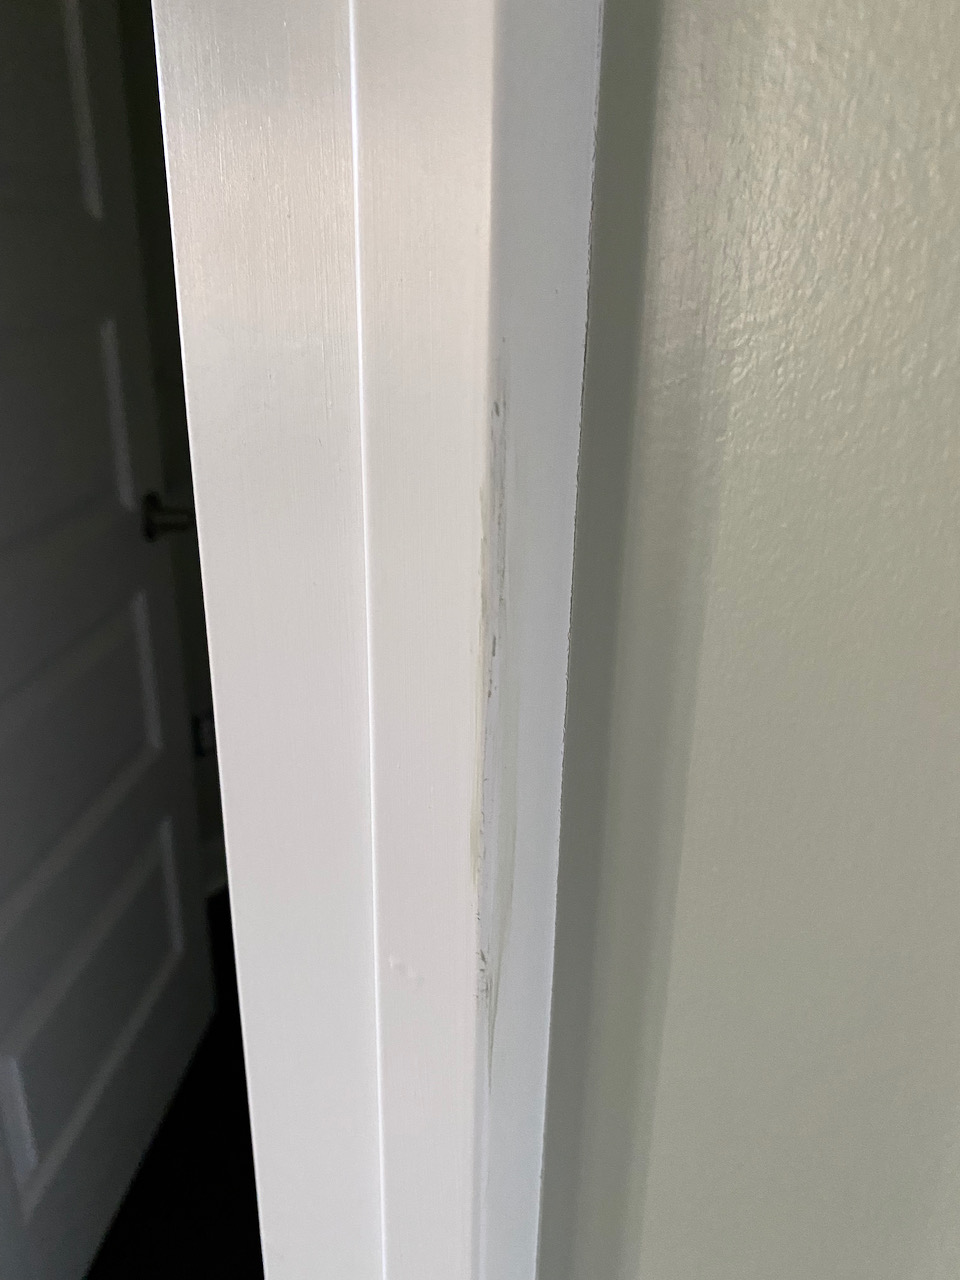 more paint on trim